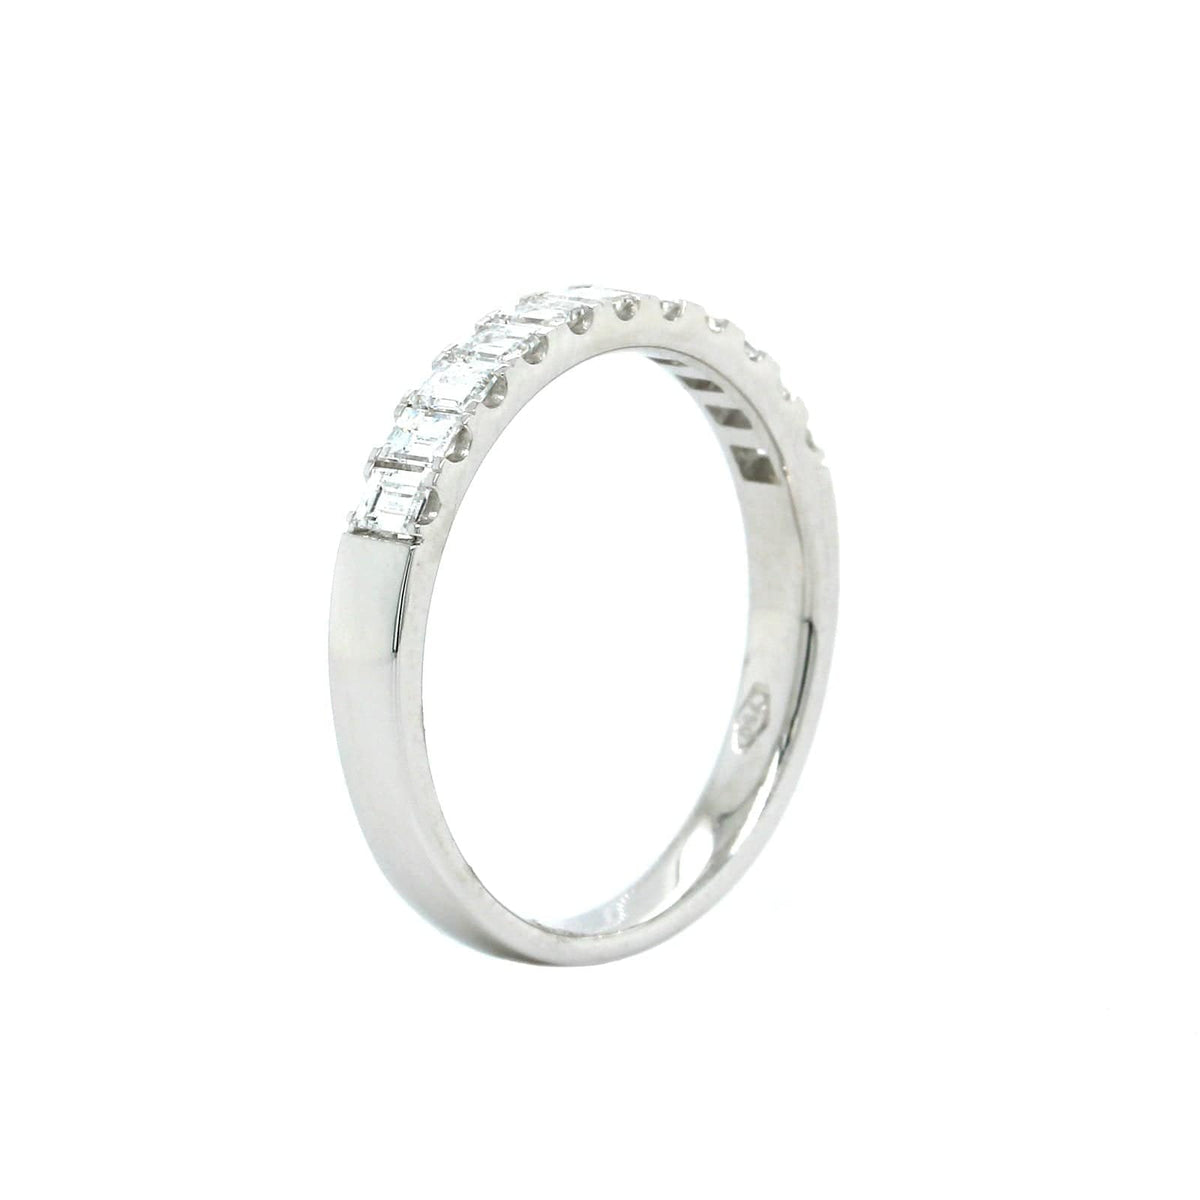 White Gold Baguette Diamond Band, white gold, Long's Jewelers